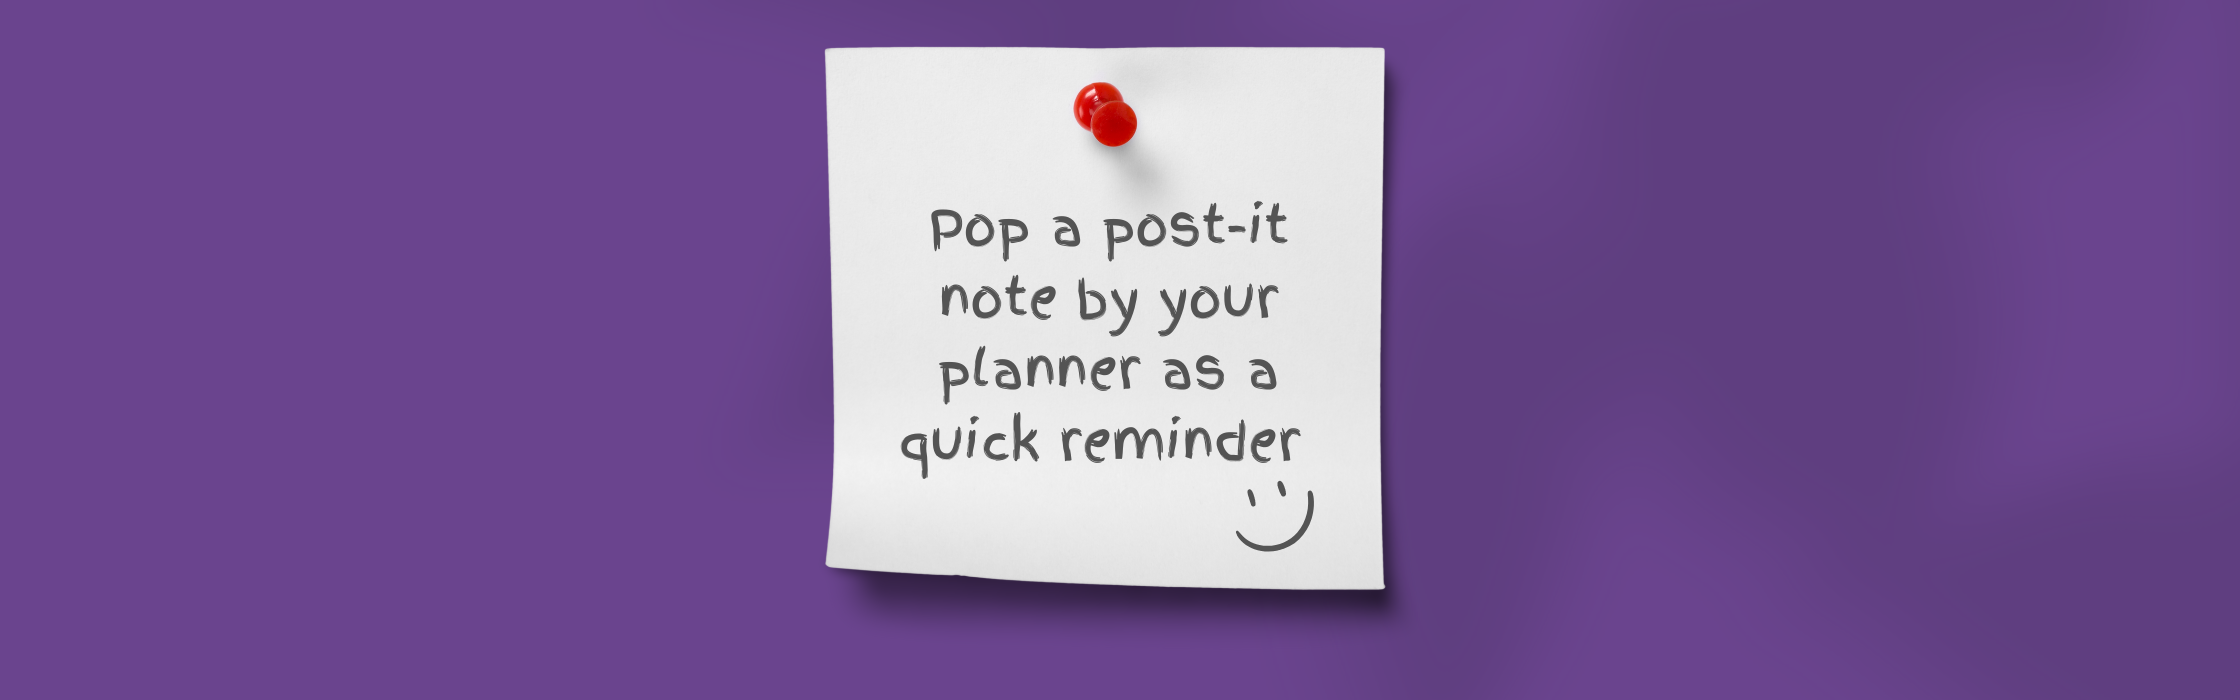 An image of a purple background with a post-it note in the center. The post-it note has the text 'Pop a post-it note by your planner as a quick reminder' written on it.